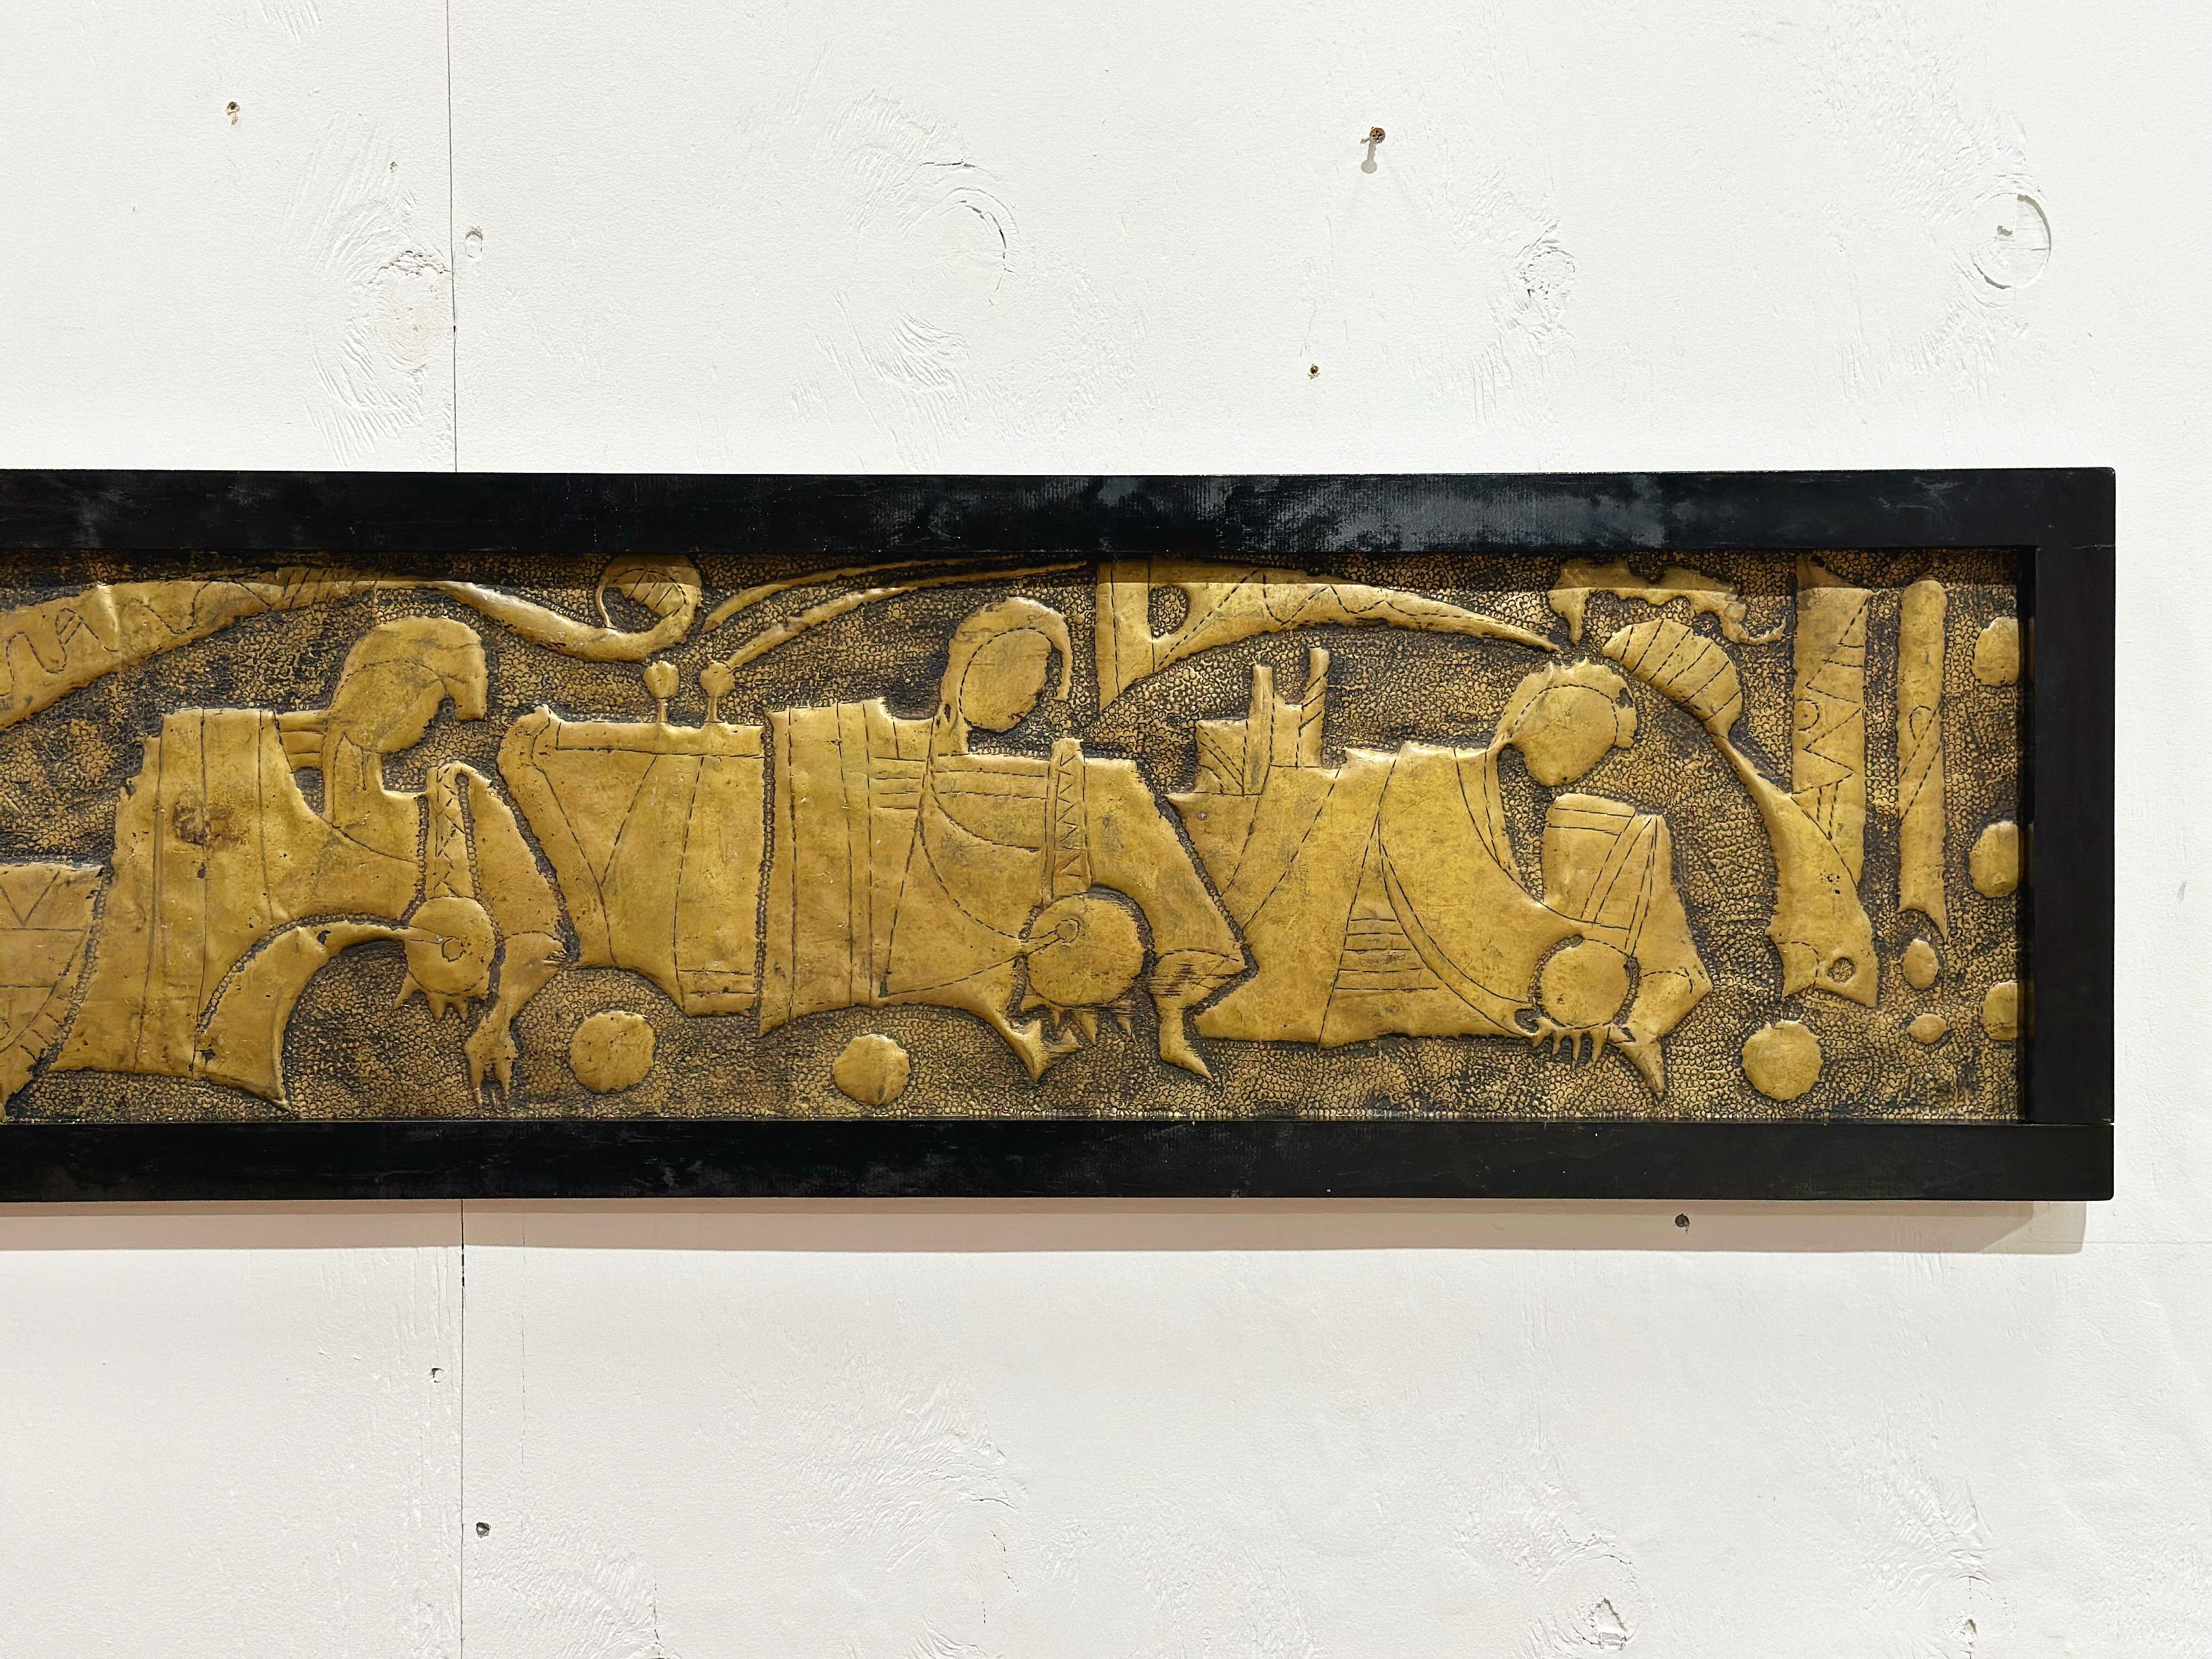 Stunning vintage brutalist style abstract framed wall hanging. Over 6 feet long. Gorgeous embossed and hammered brass displays a wonderful patina. 
I think the subject could portray some sort of ancient naval battle.